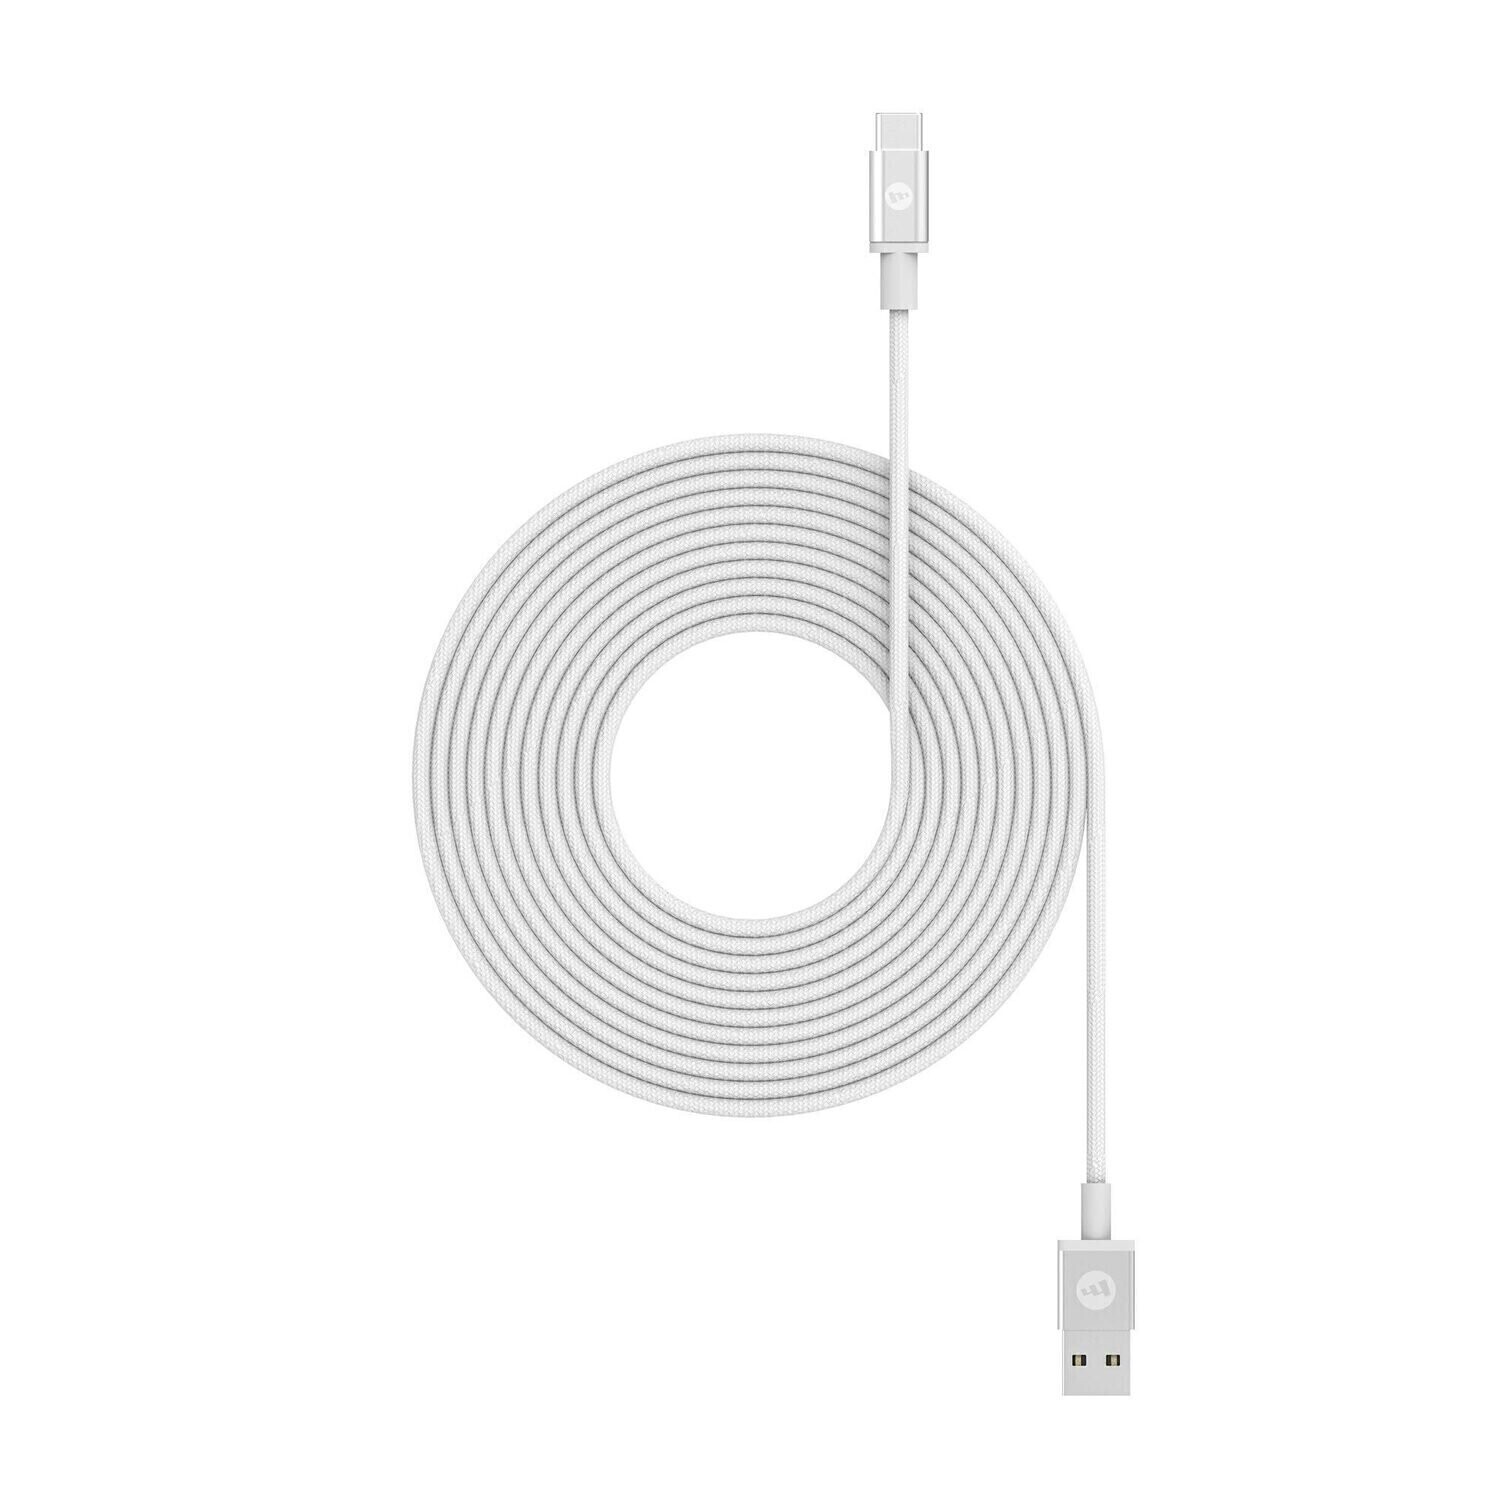 Mophie Cable USB-A to USB-C (3 Meter), White